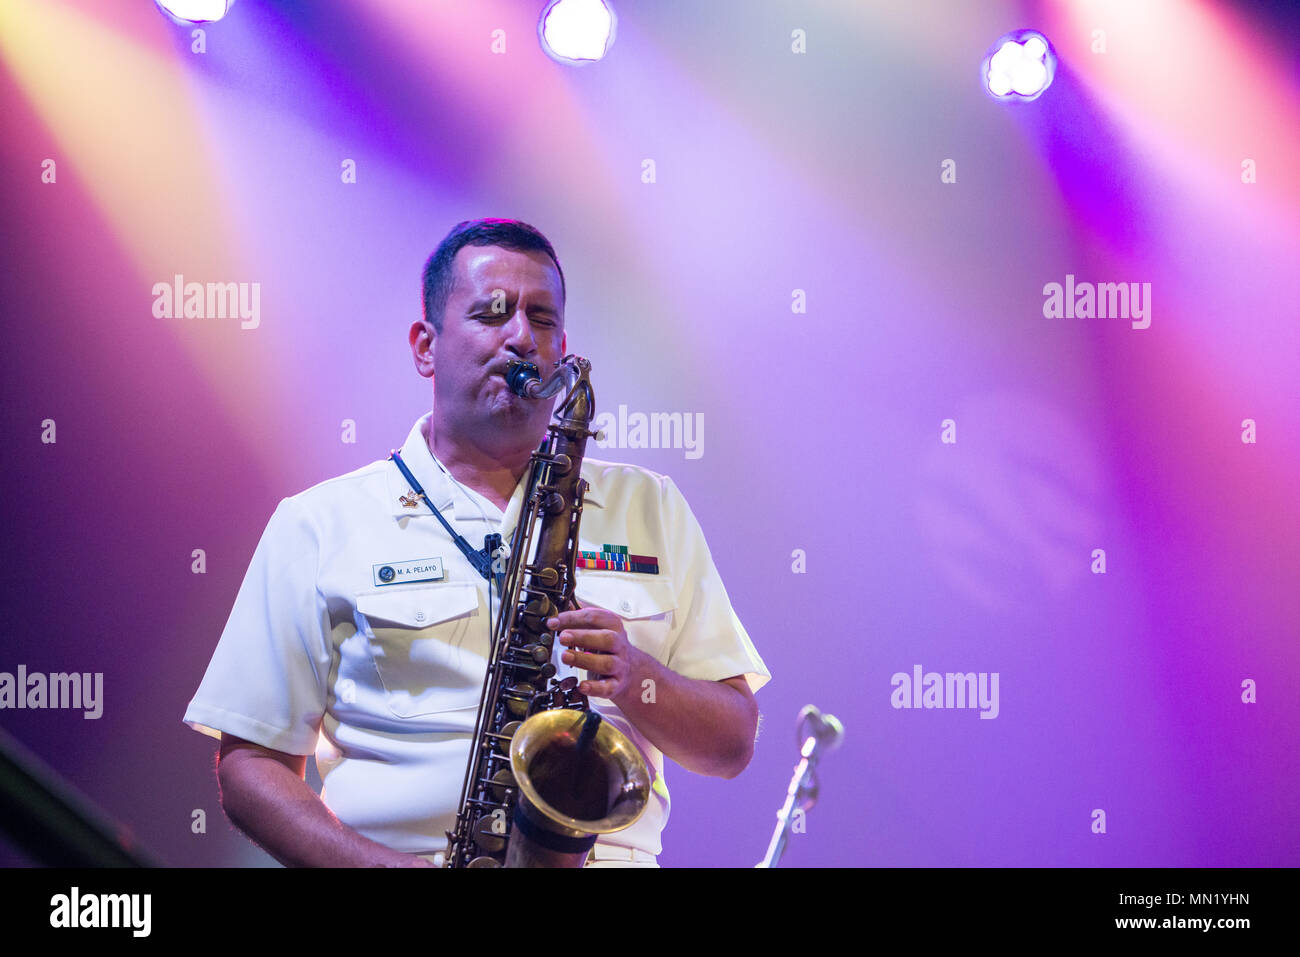 WICHITA FALLS, Texas (Aug. 14, 2017) Musician 1st Class Manuel Pelayo de Gongora performs with the U.S. Navy Band Cruisers popular music group at the Wichita Theater in Wichita Falls, Texas. The U.S. Navy Band performed in four states during its 14-city national tour, connecting the Navy to communities that don't see Sailors at work on a regular basis. (U.S. Navy photo by Chief Musician Adam Grimm/Released) Stock Photo